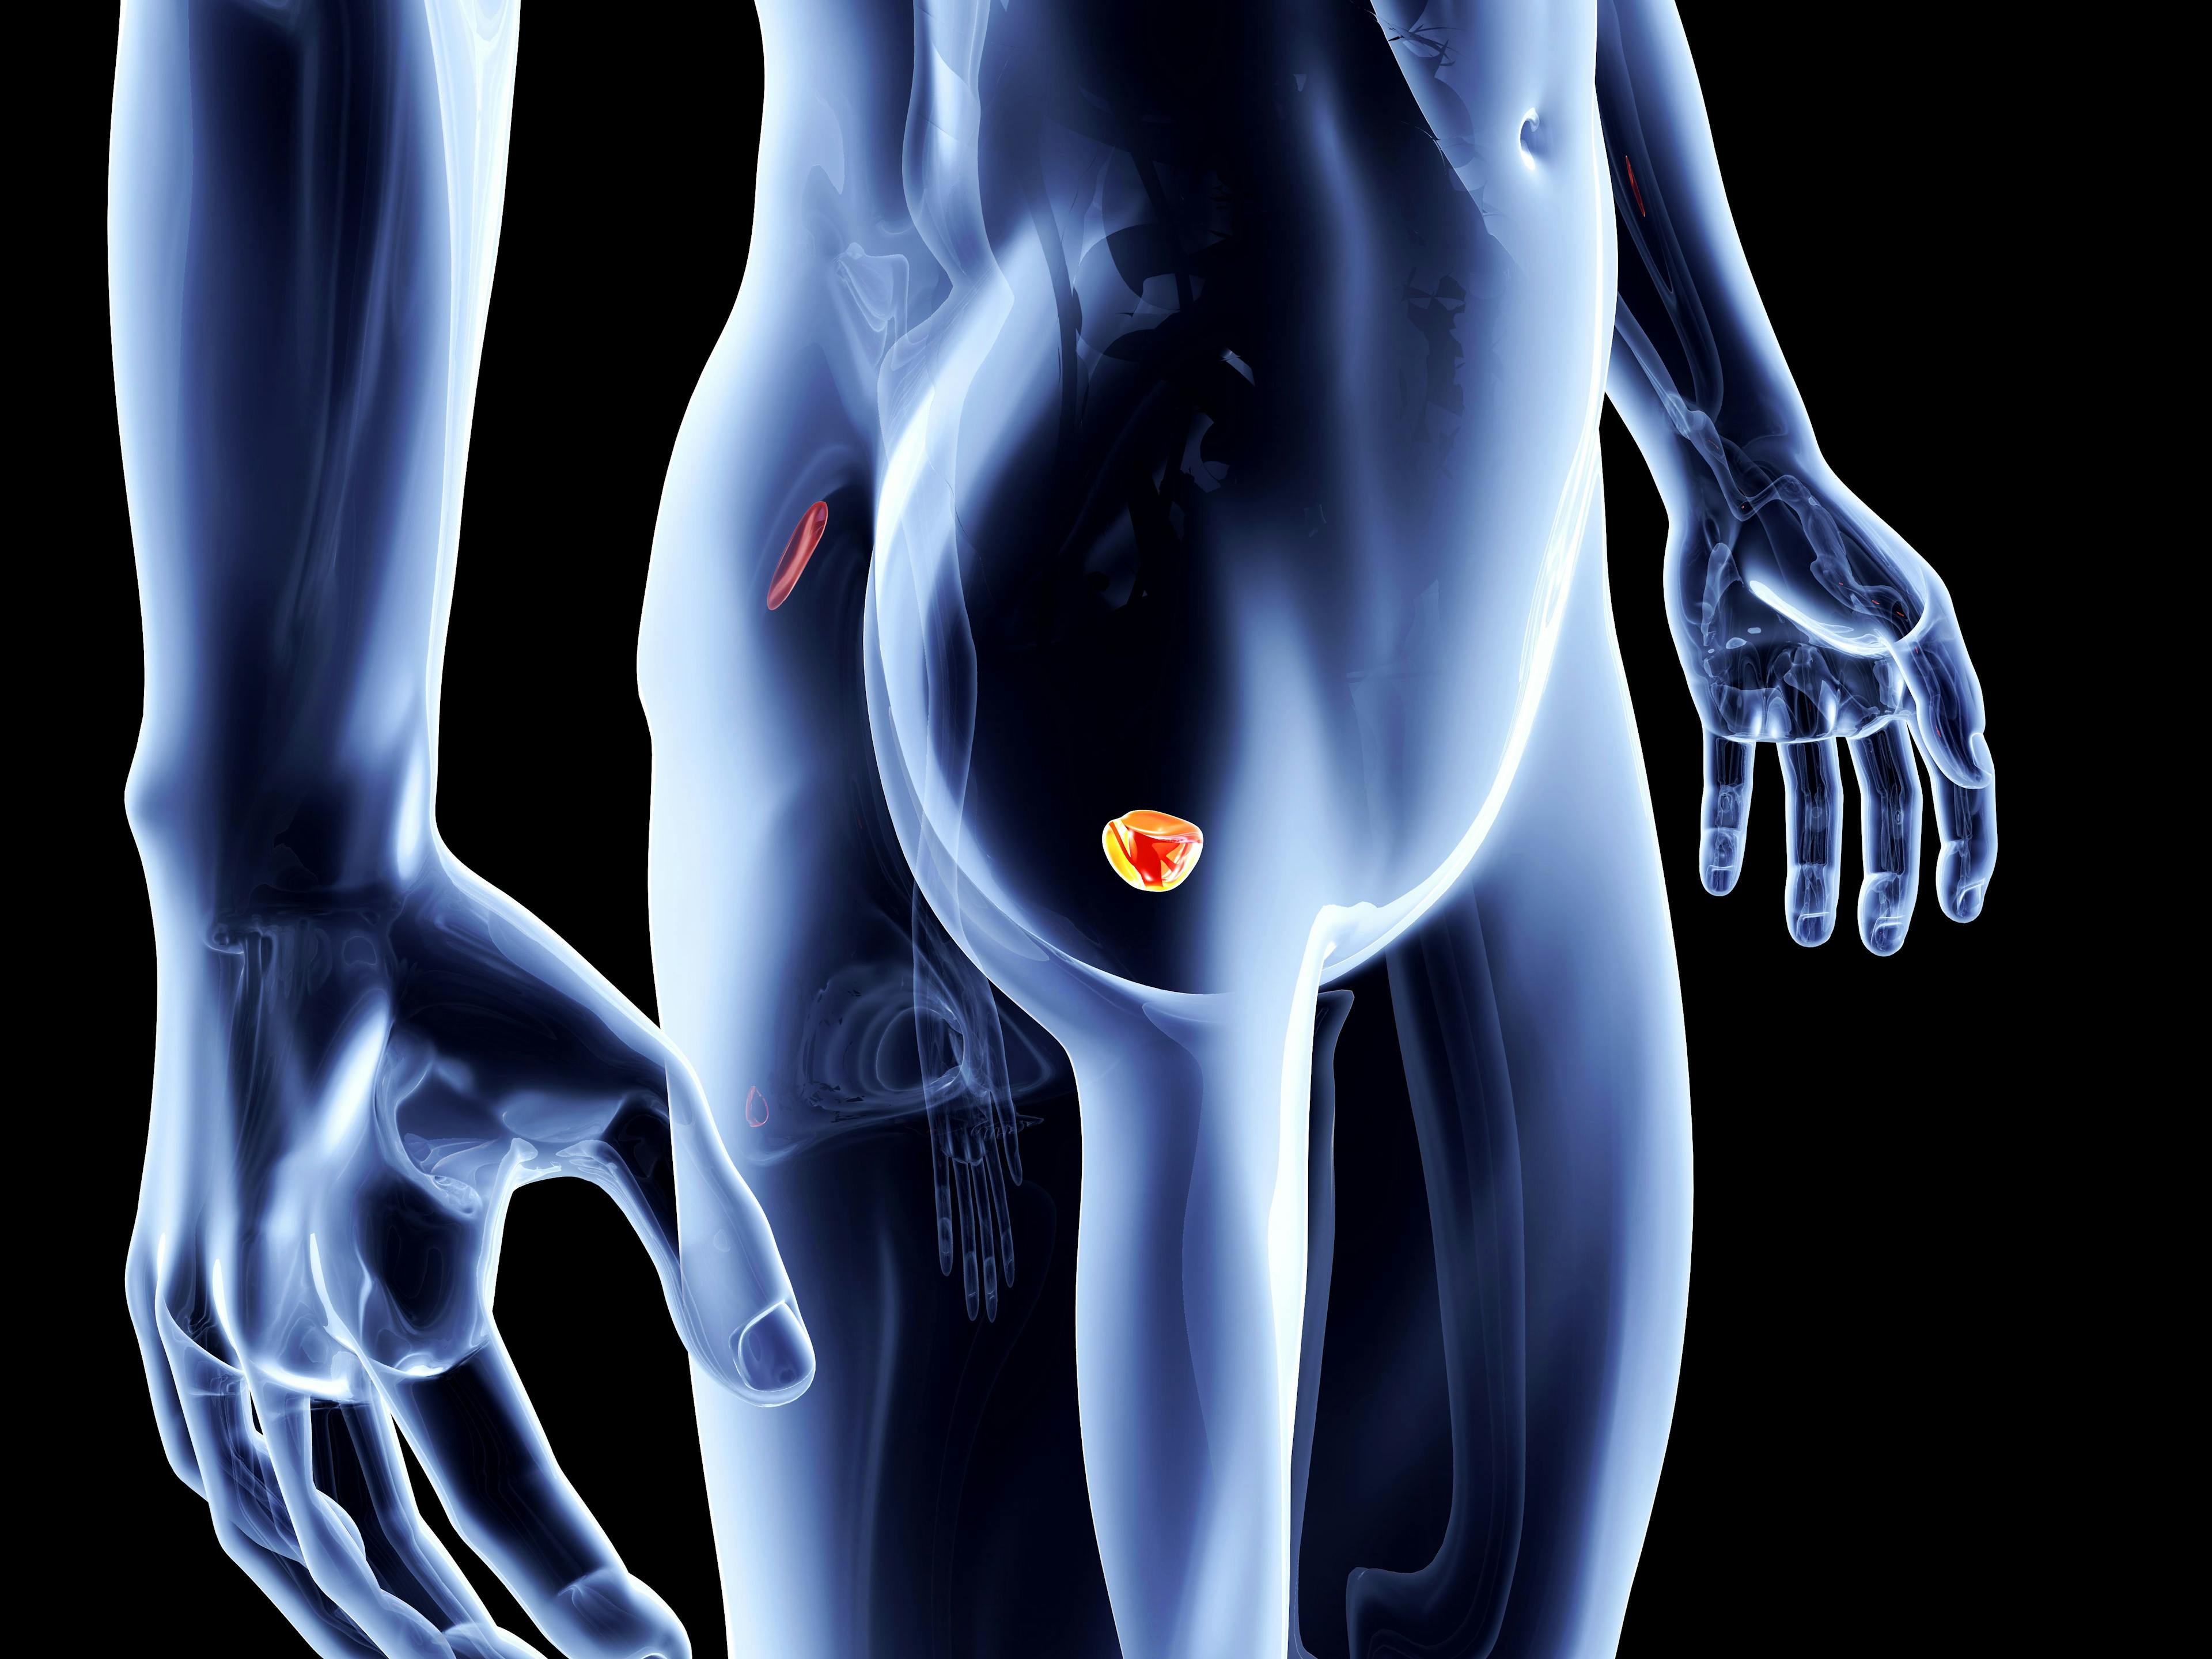 Prostate cancer treatment complications